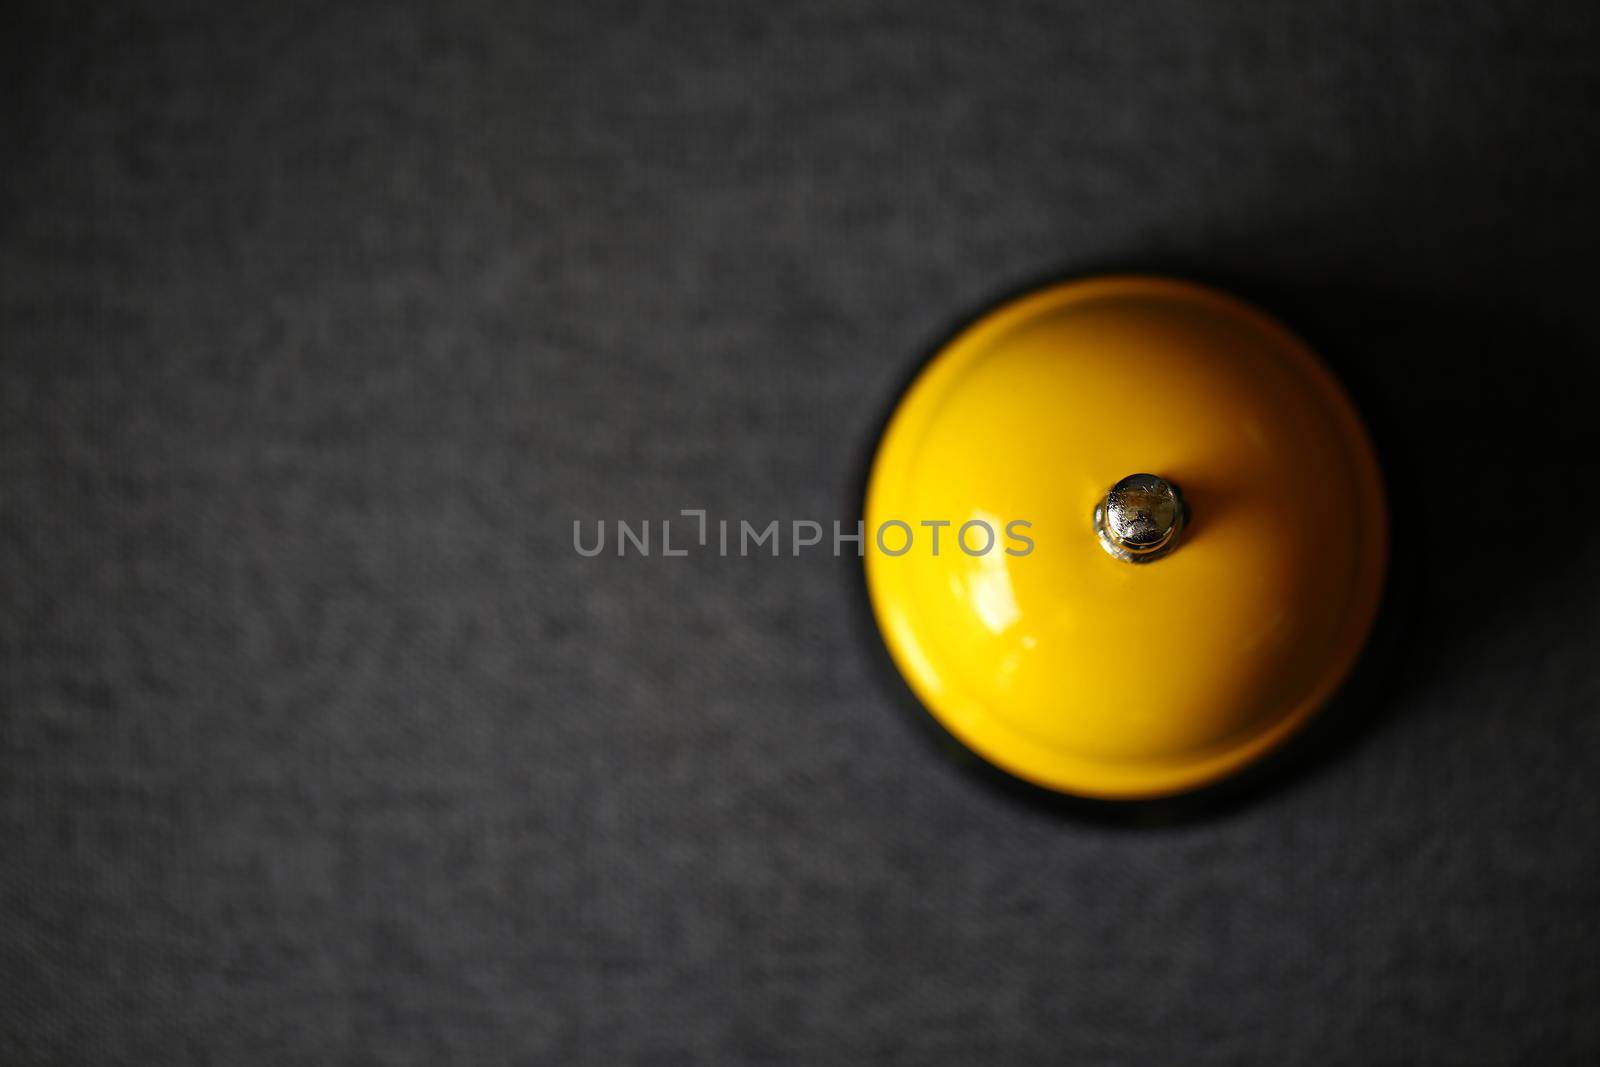 Bell on counter for service with blurred background